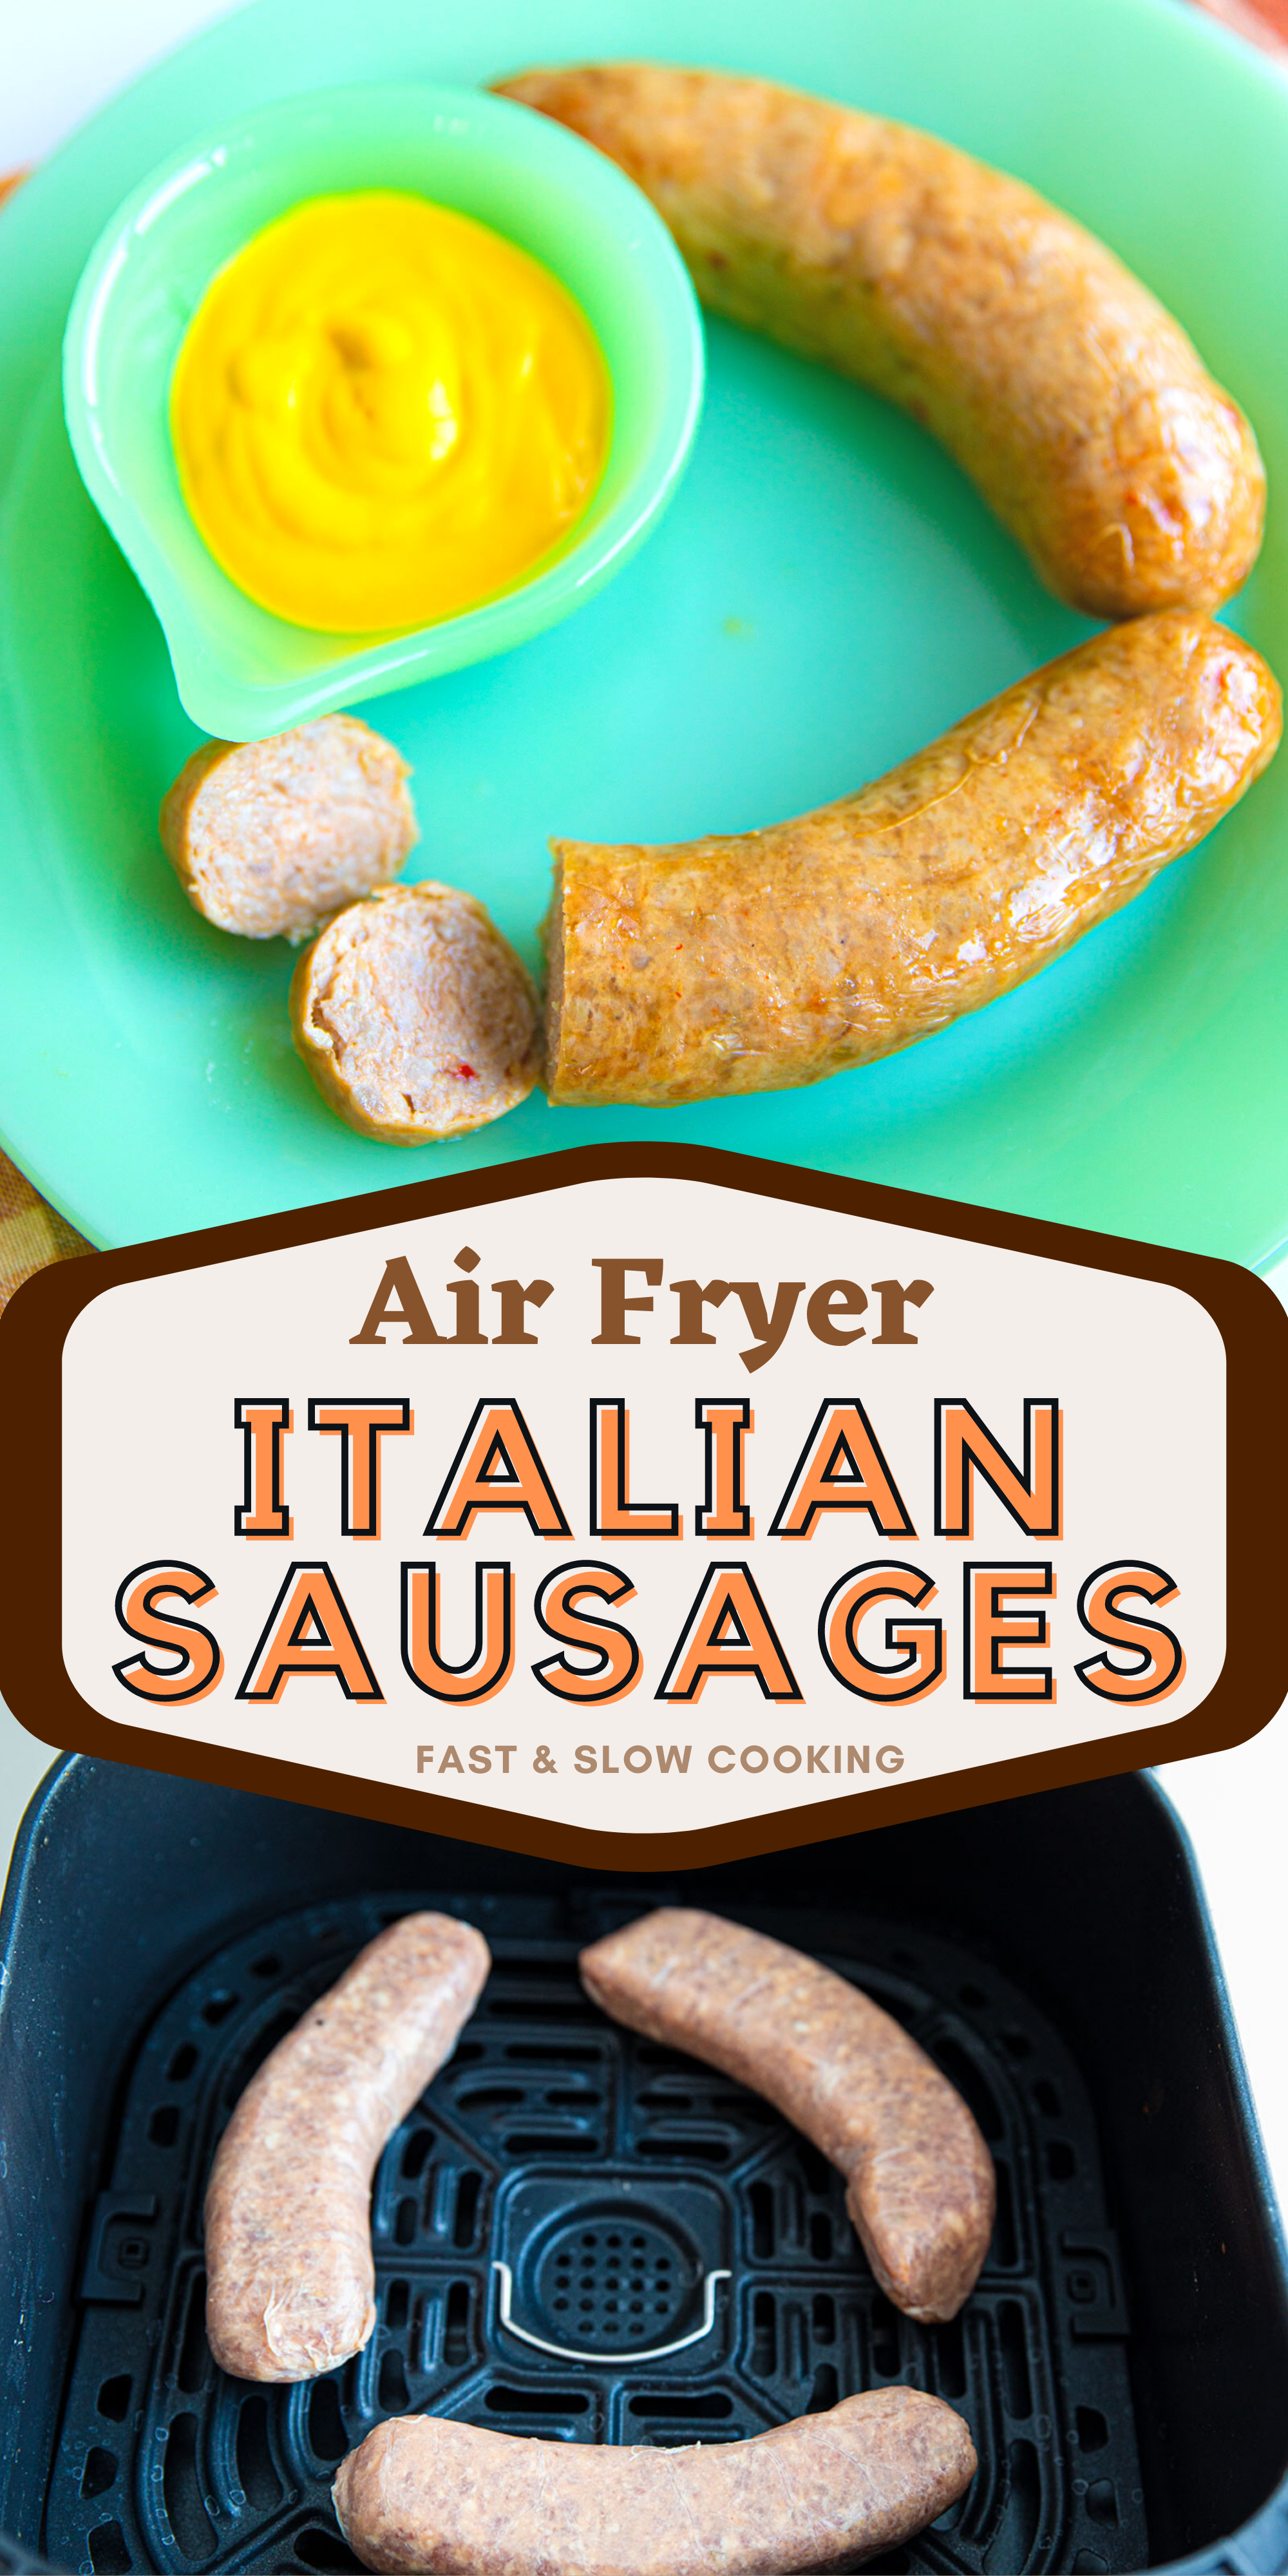 Cooking Italian sausages in your air fryer makes the sausages so tender, juicy and crispy on the outside that you will never do it on the stovetop again!